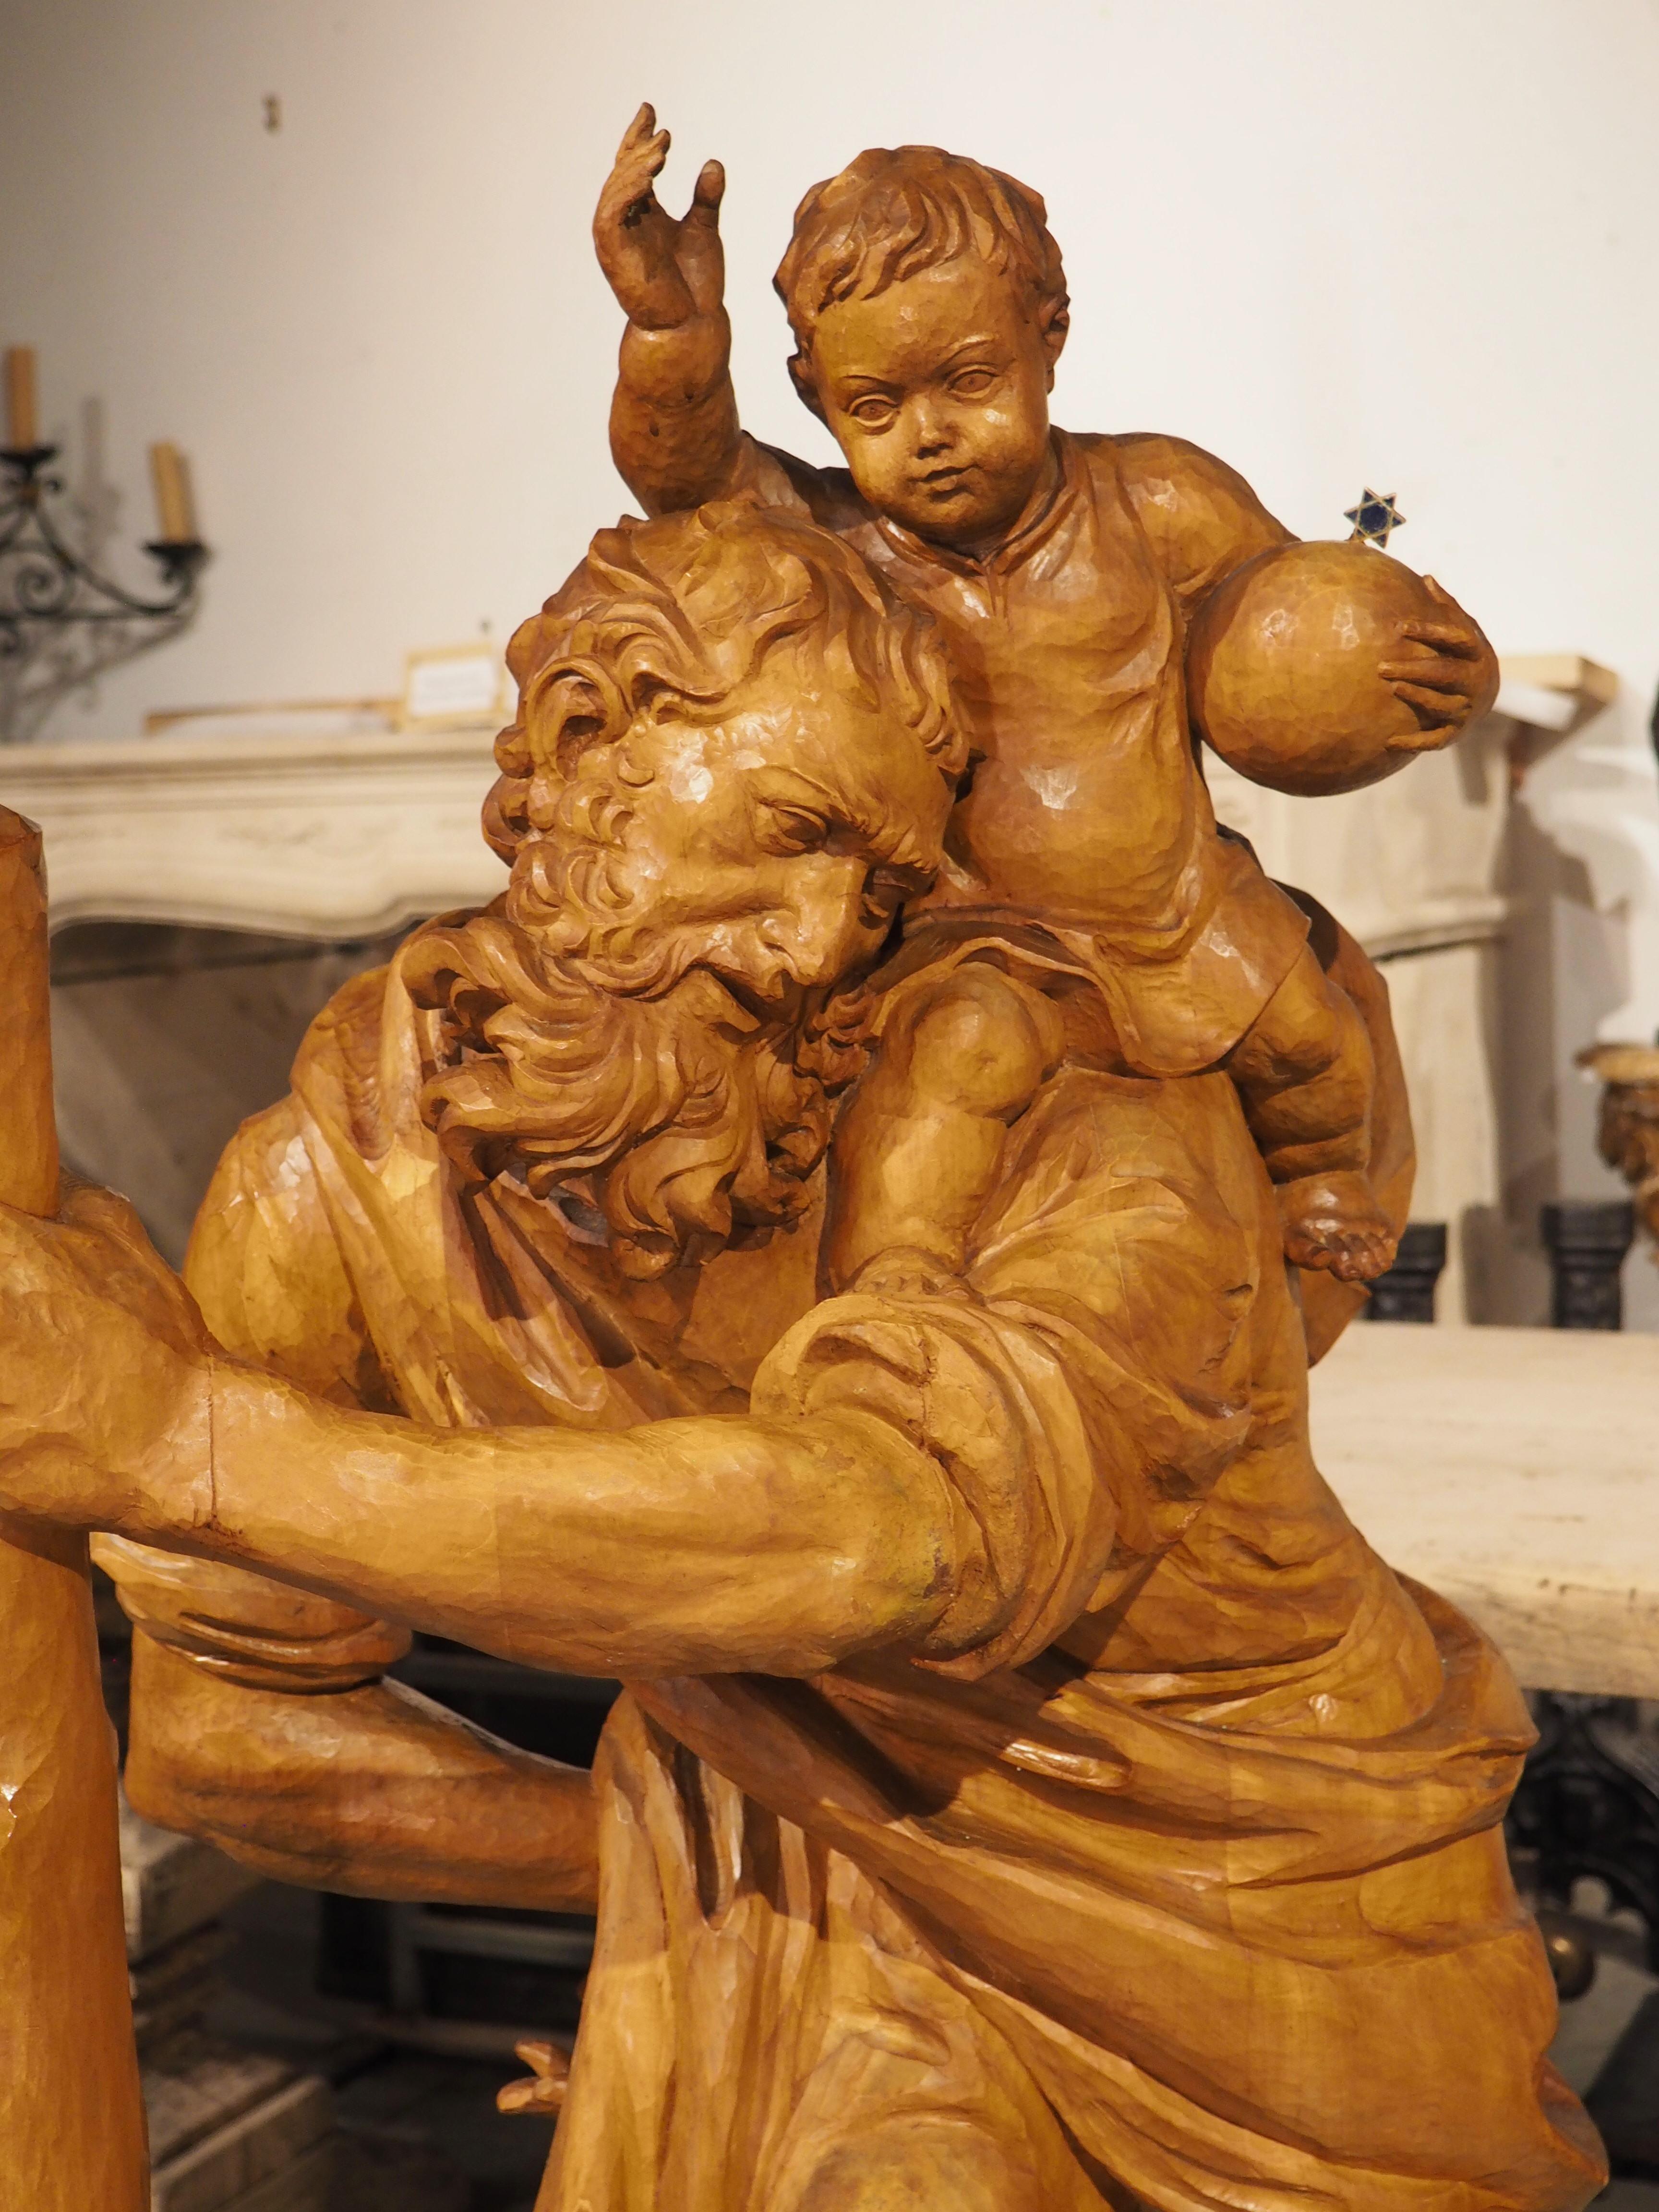 Hand-carved from limewood in Germany, circa 1930, this four-and-a-half-foot tall statue depicts St Christopher carrying a young Jesus across a river. The legend states that Christopher (who was considered to have size and strength), was instructed